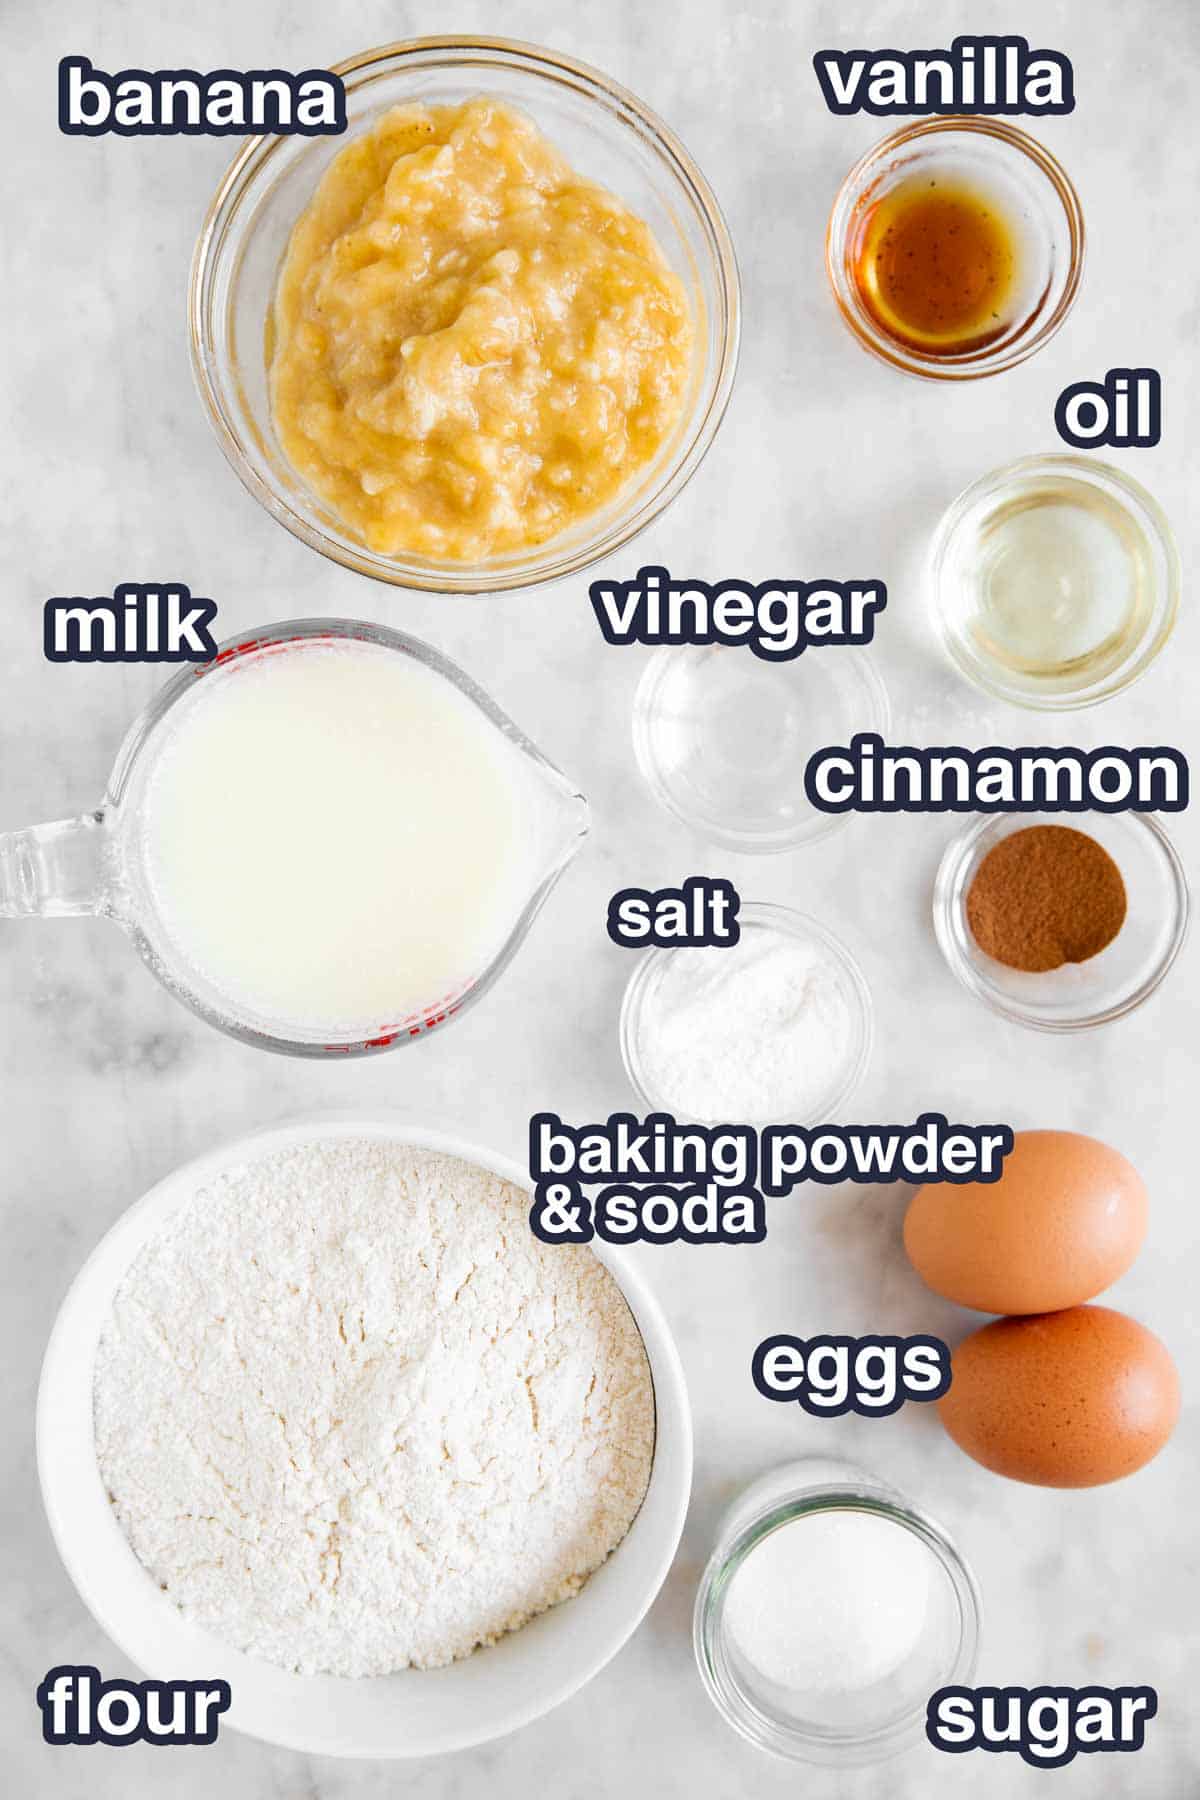 ingredients for banana pancakes with text labels